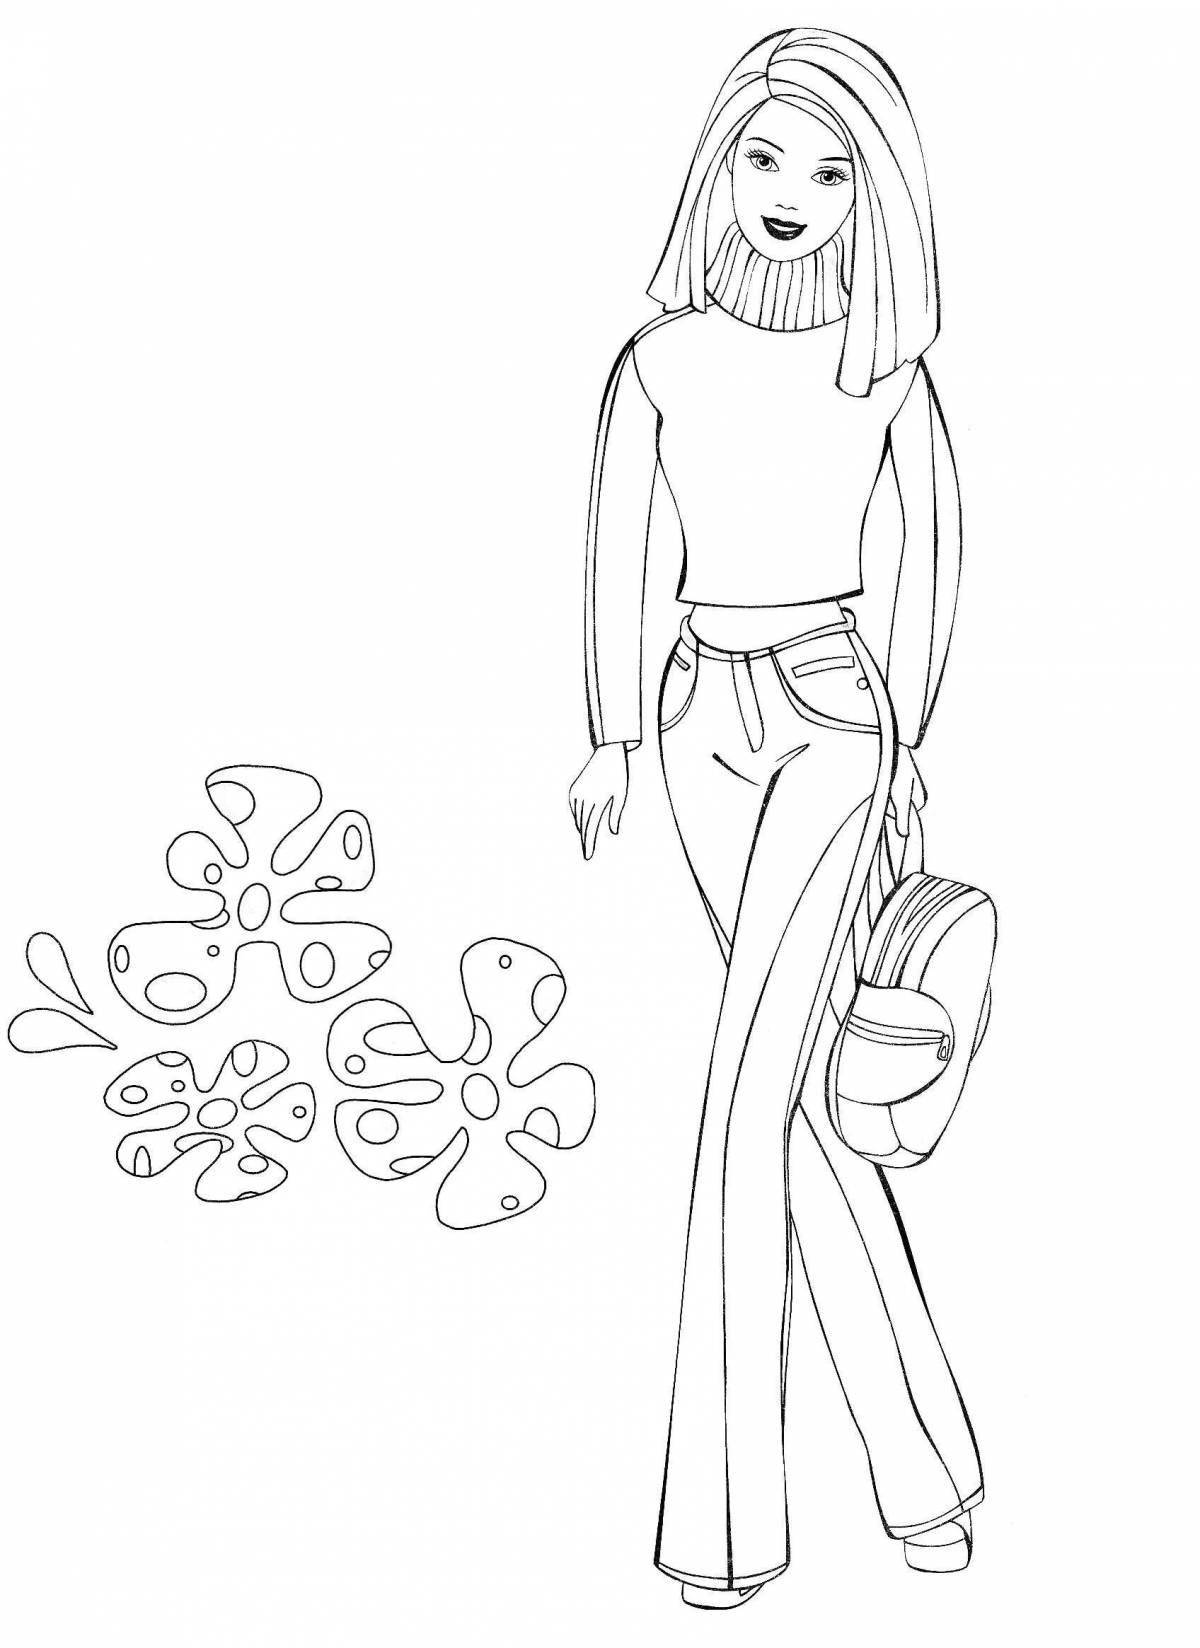 Elegant outfits for coloring barbie